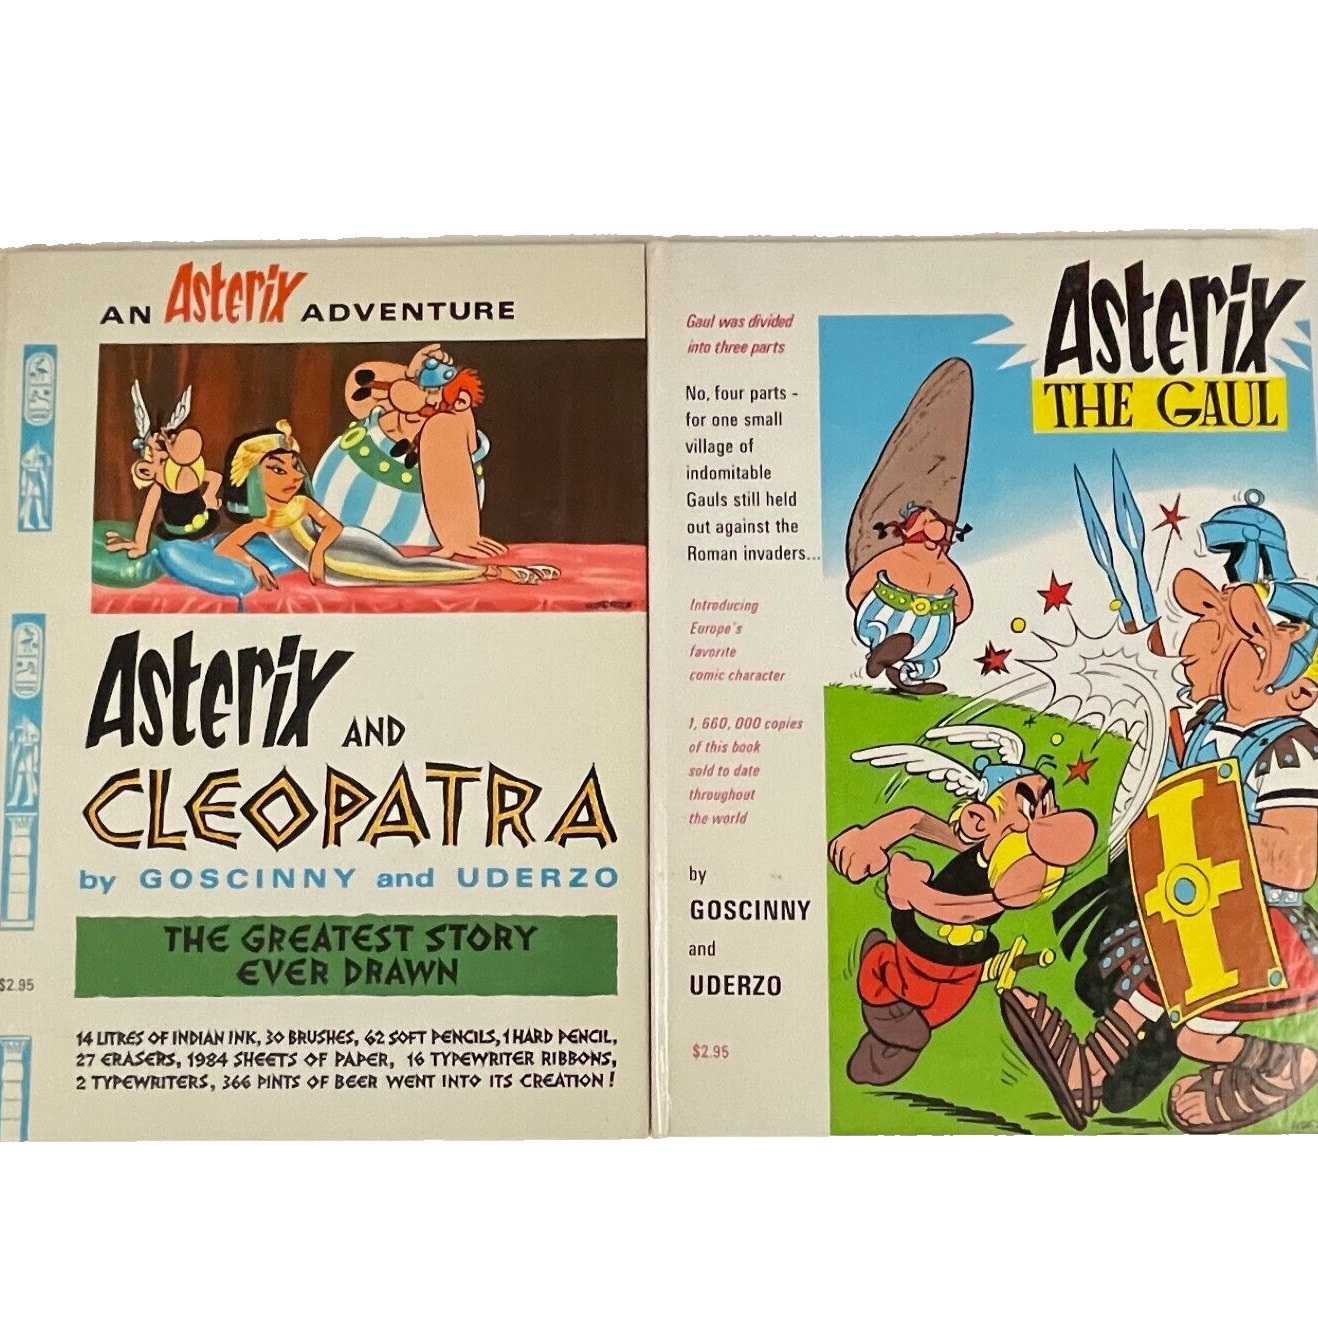 2 hardcovers ASTERIX THE GAUL / ASTERIX & CLEOPATRA by Goscinny & Uderzo